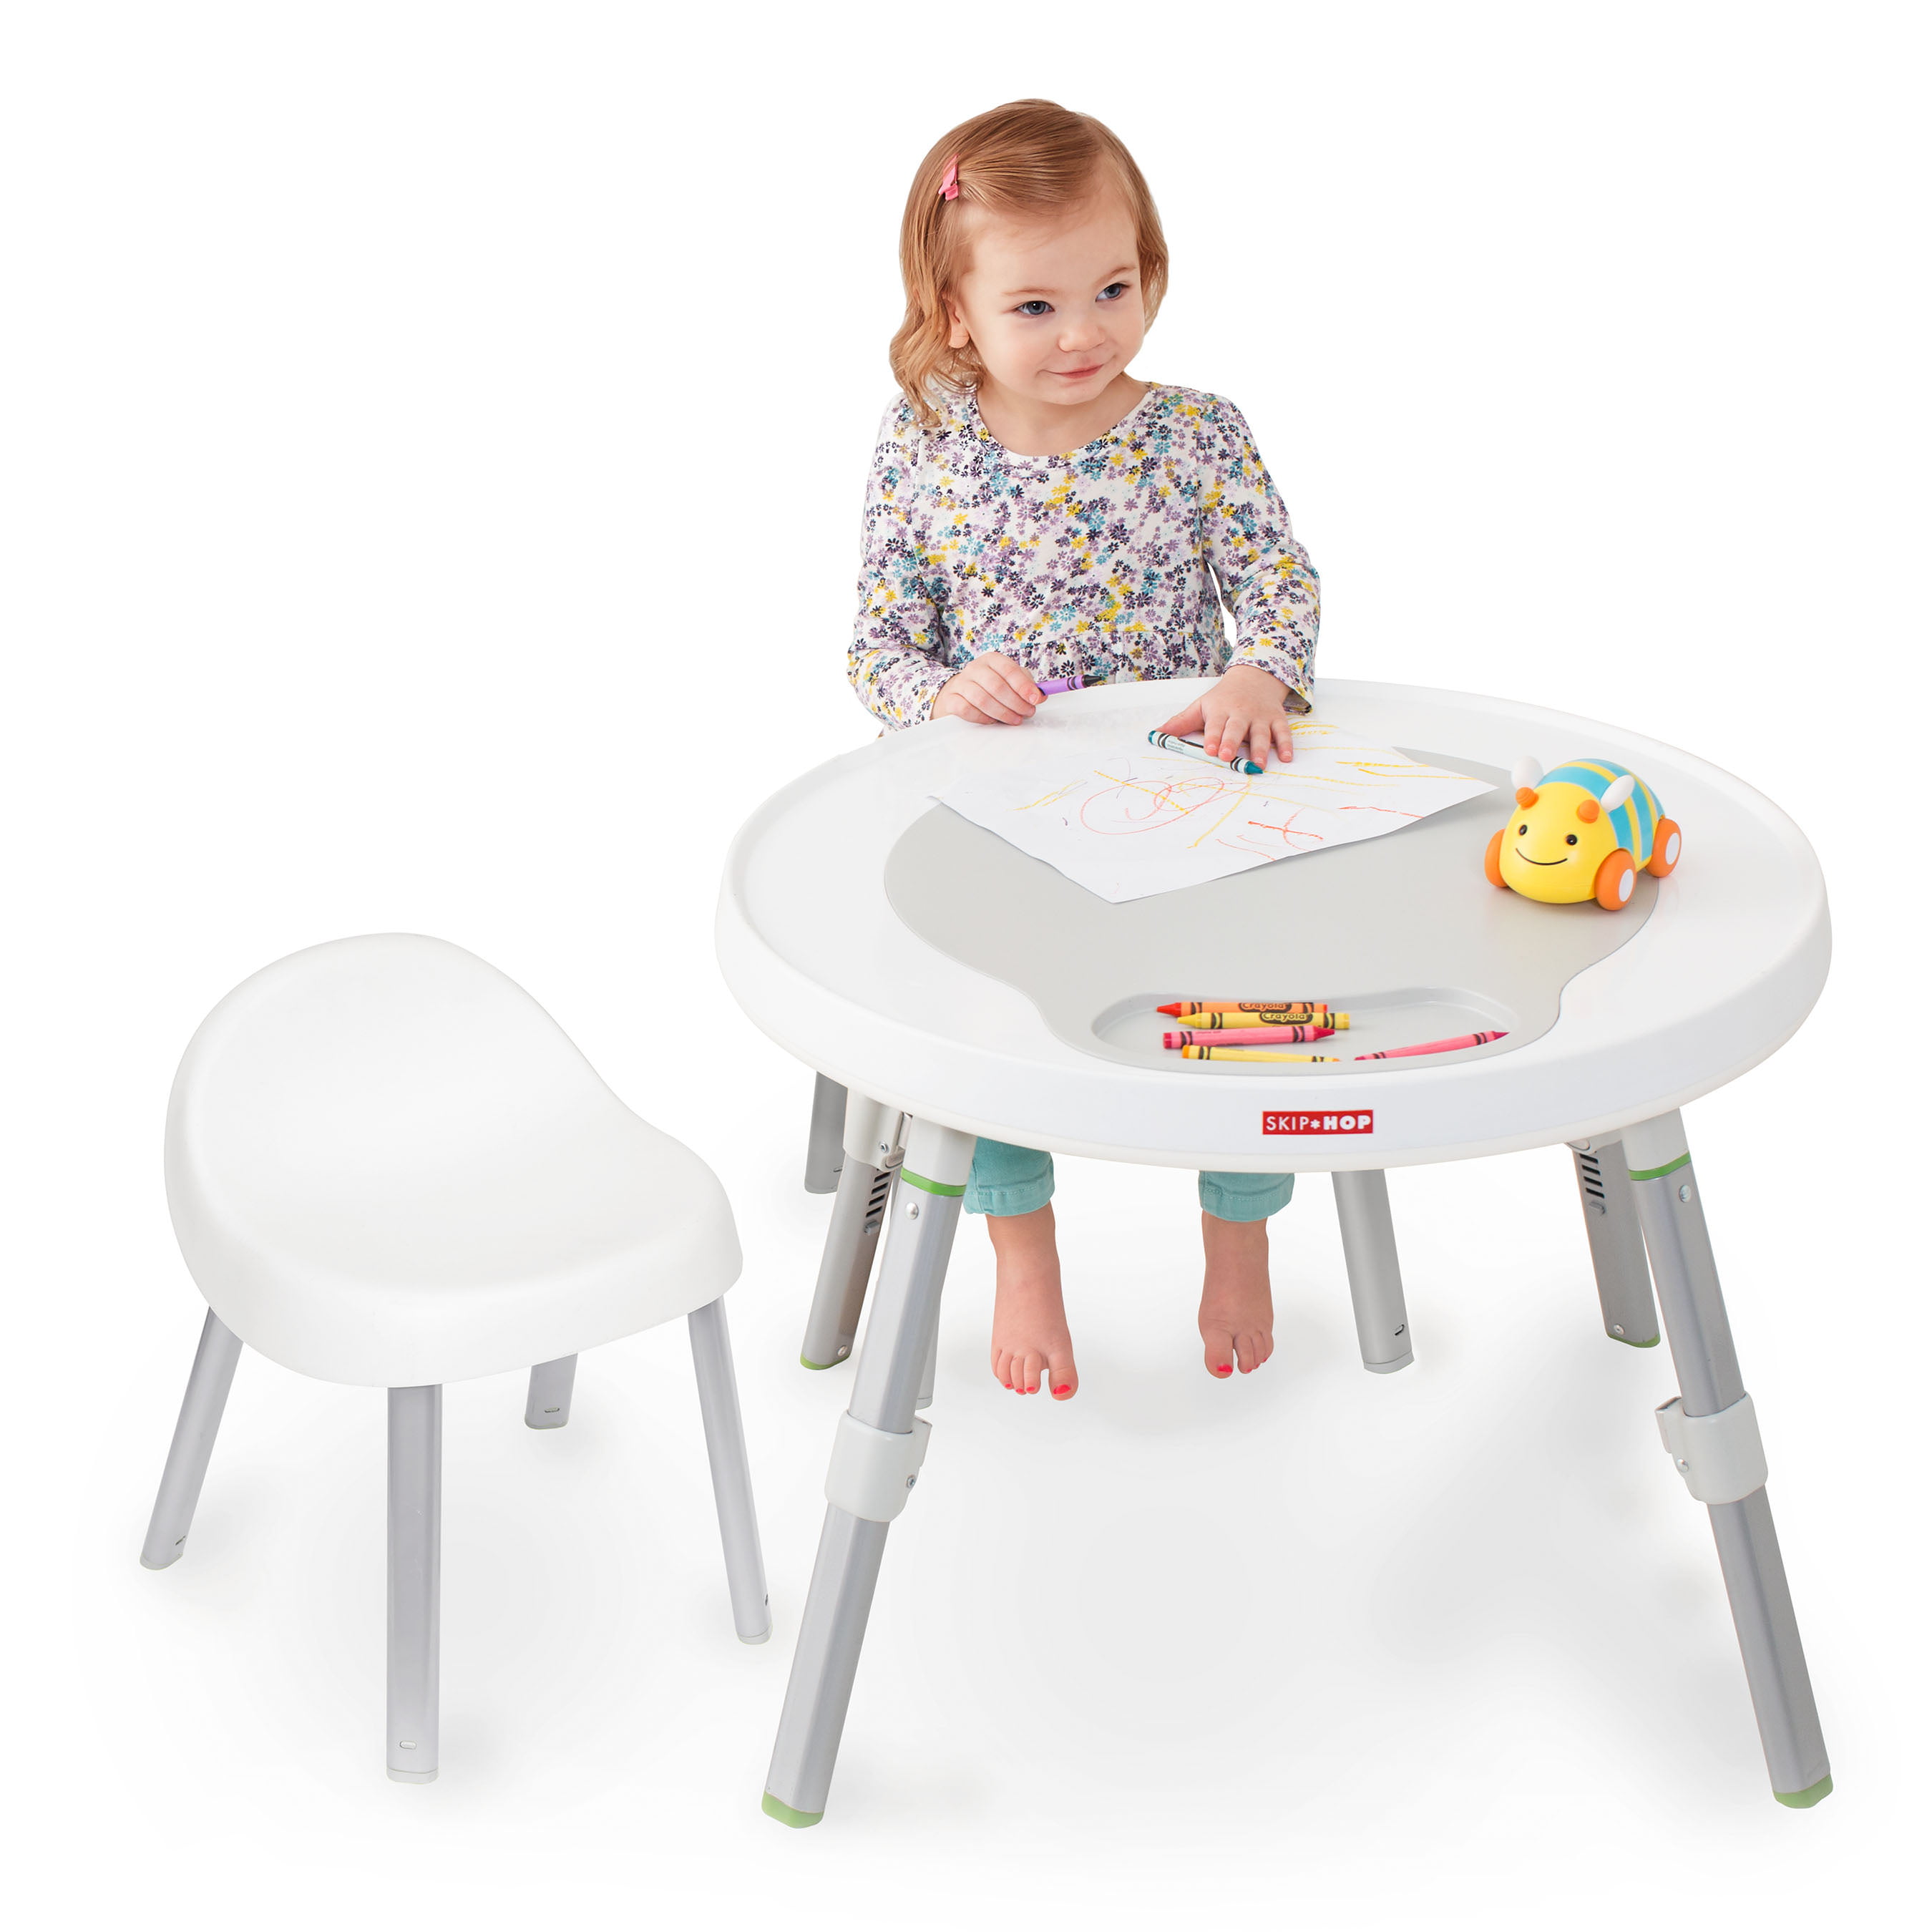 skip hop activity table cleaning